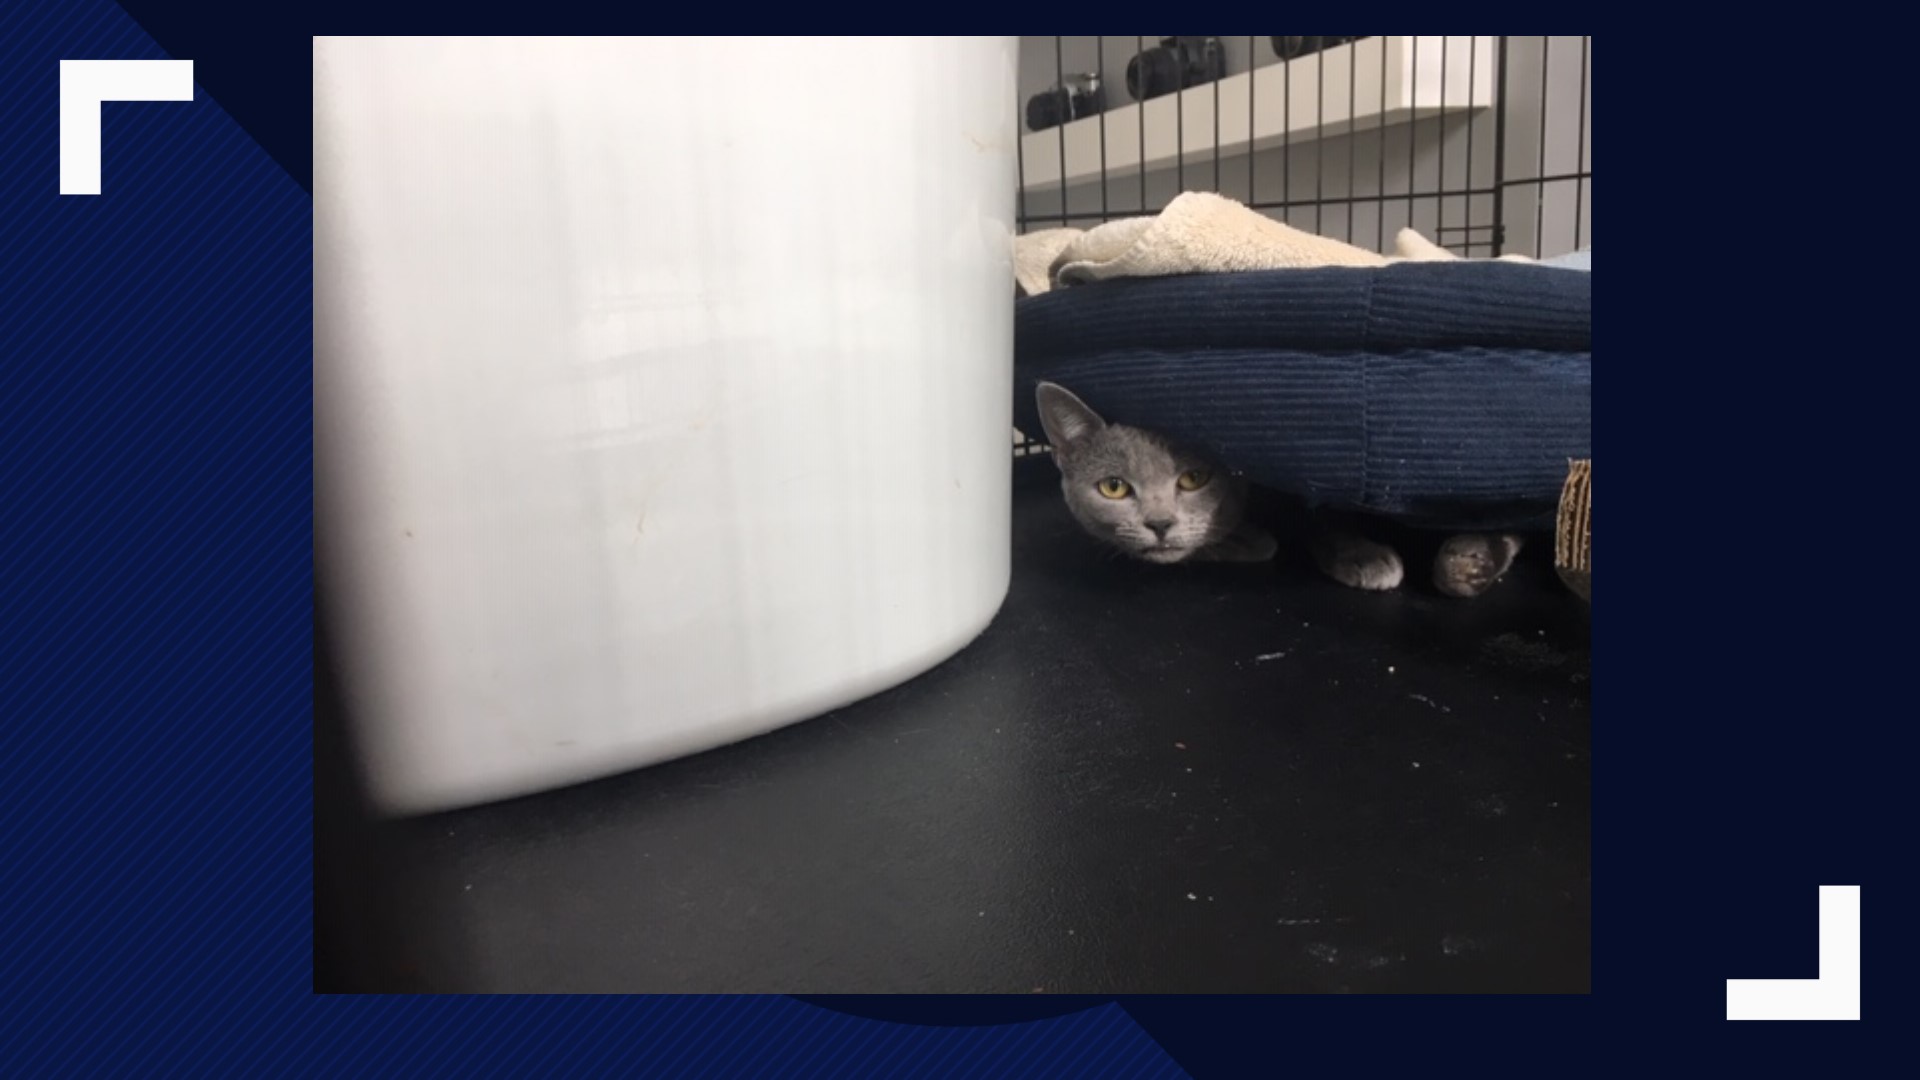 Greensboro neighbors report someone shot their kitten with a pellet gun. It's not the first time it's happened in Greensboro. Now the police are investigating.